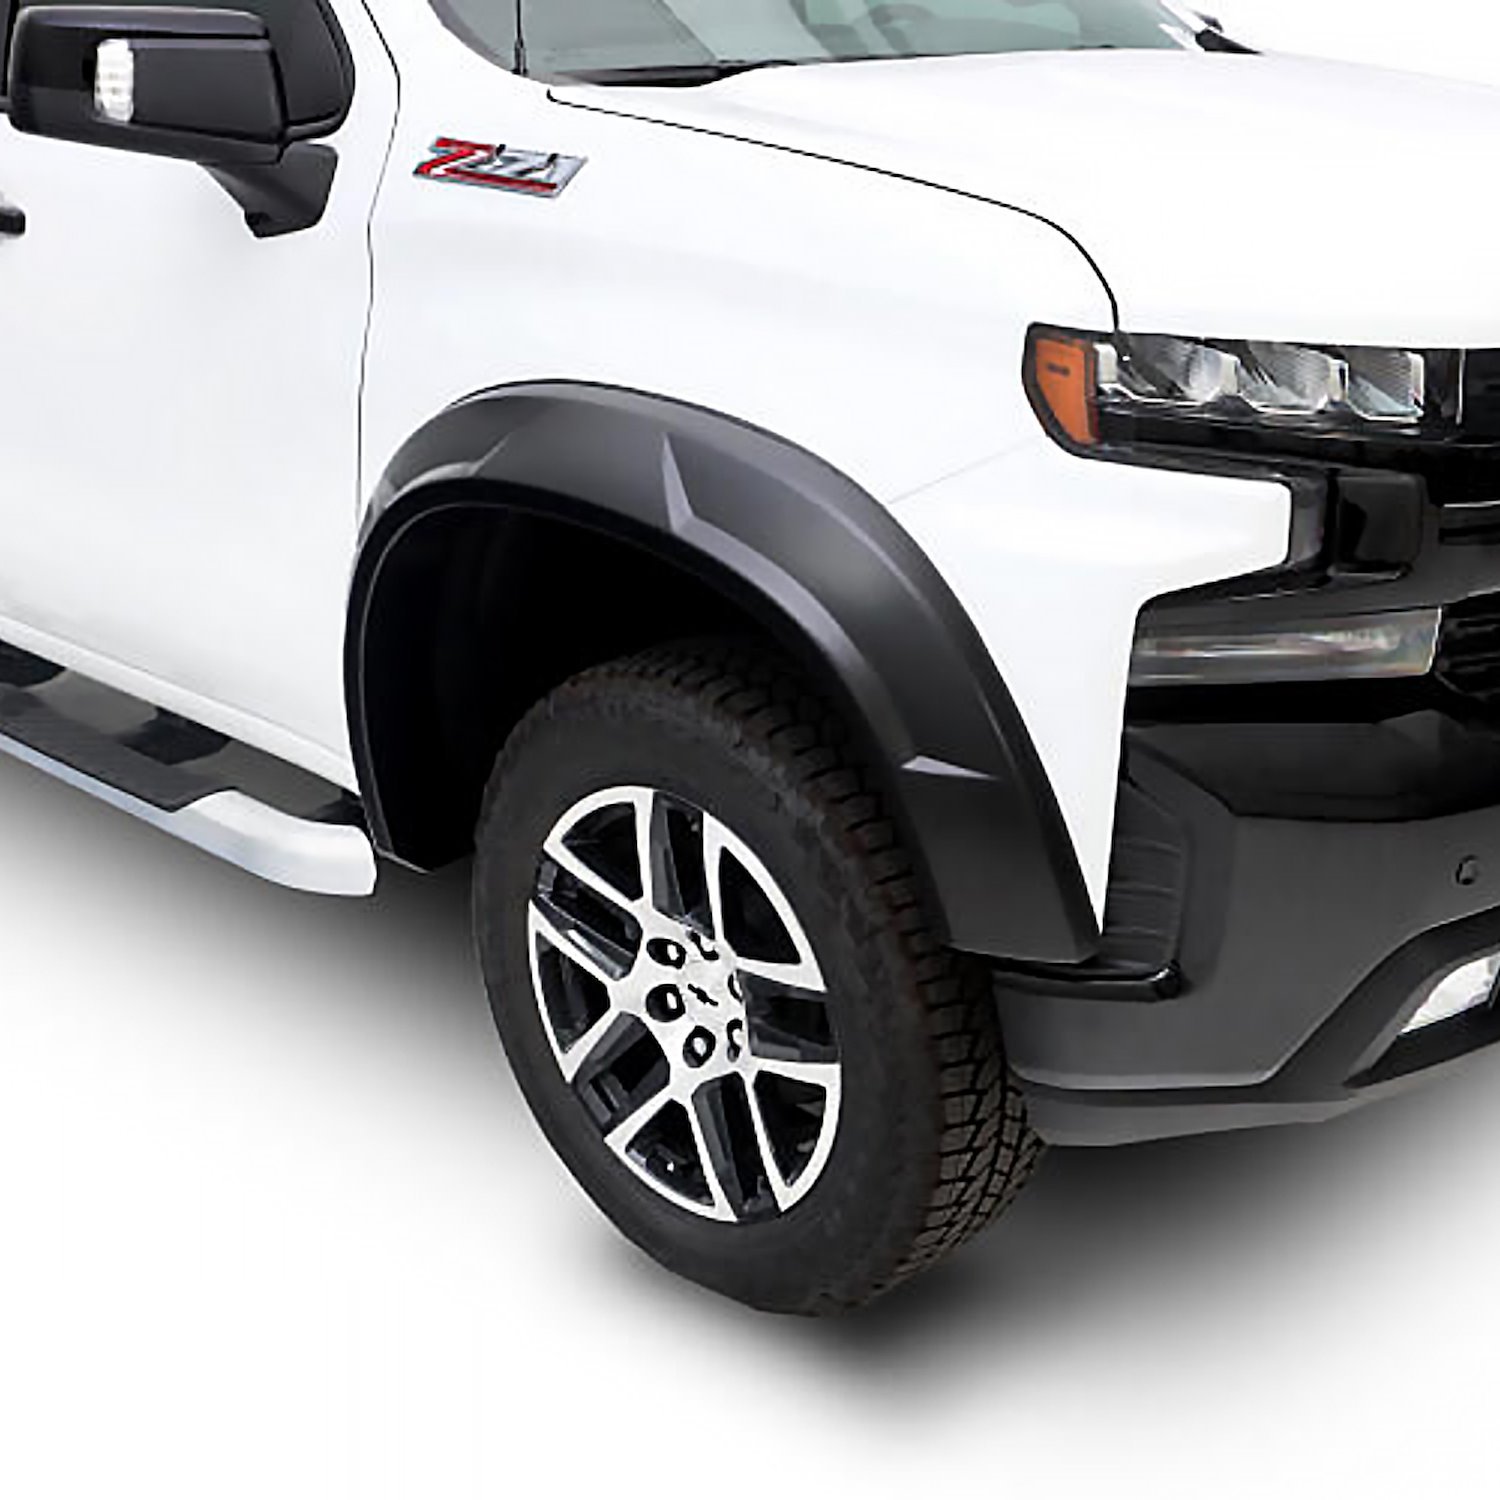 DRT-Style Front & Rear Fender Flares for Select Chevrolet Silverado 2500HD/3500HD Trucks